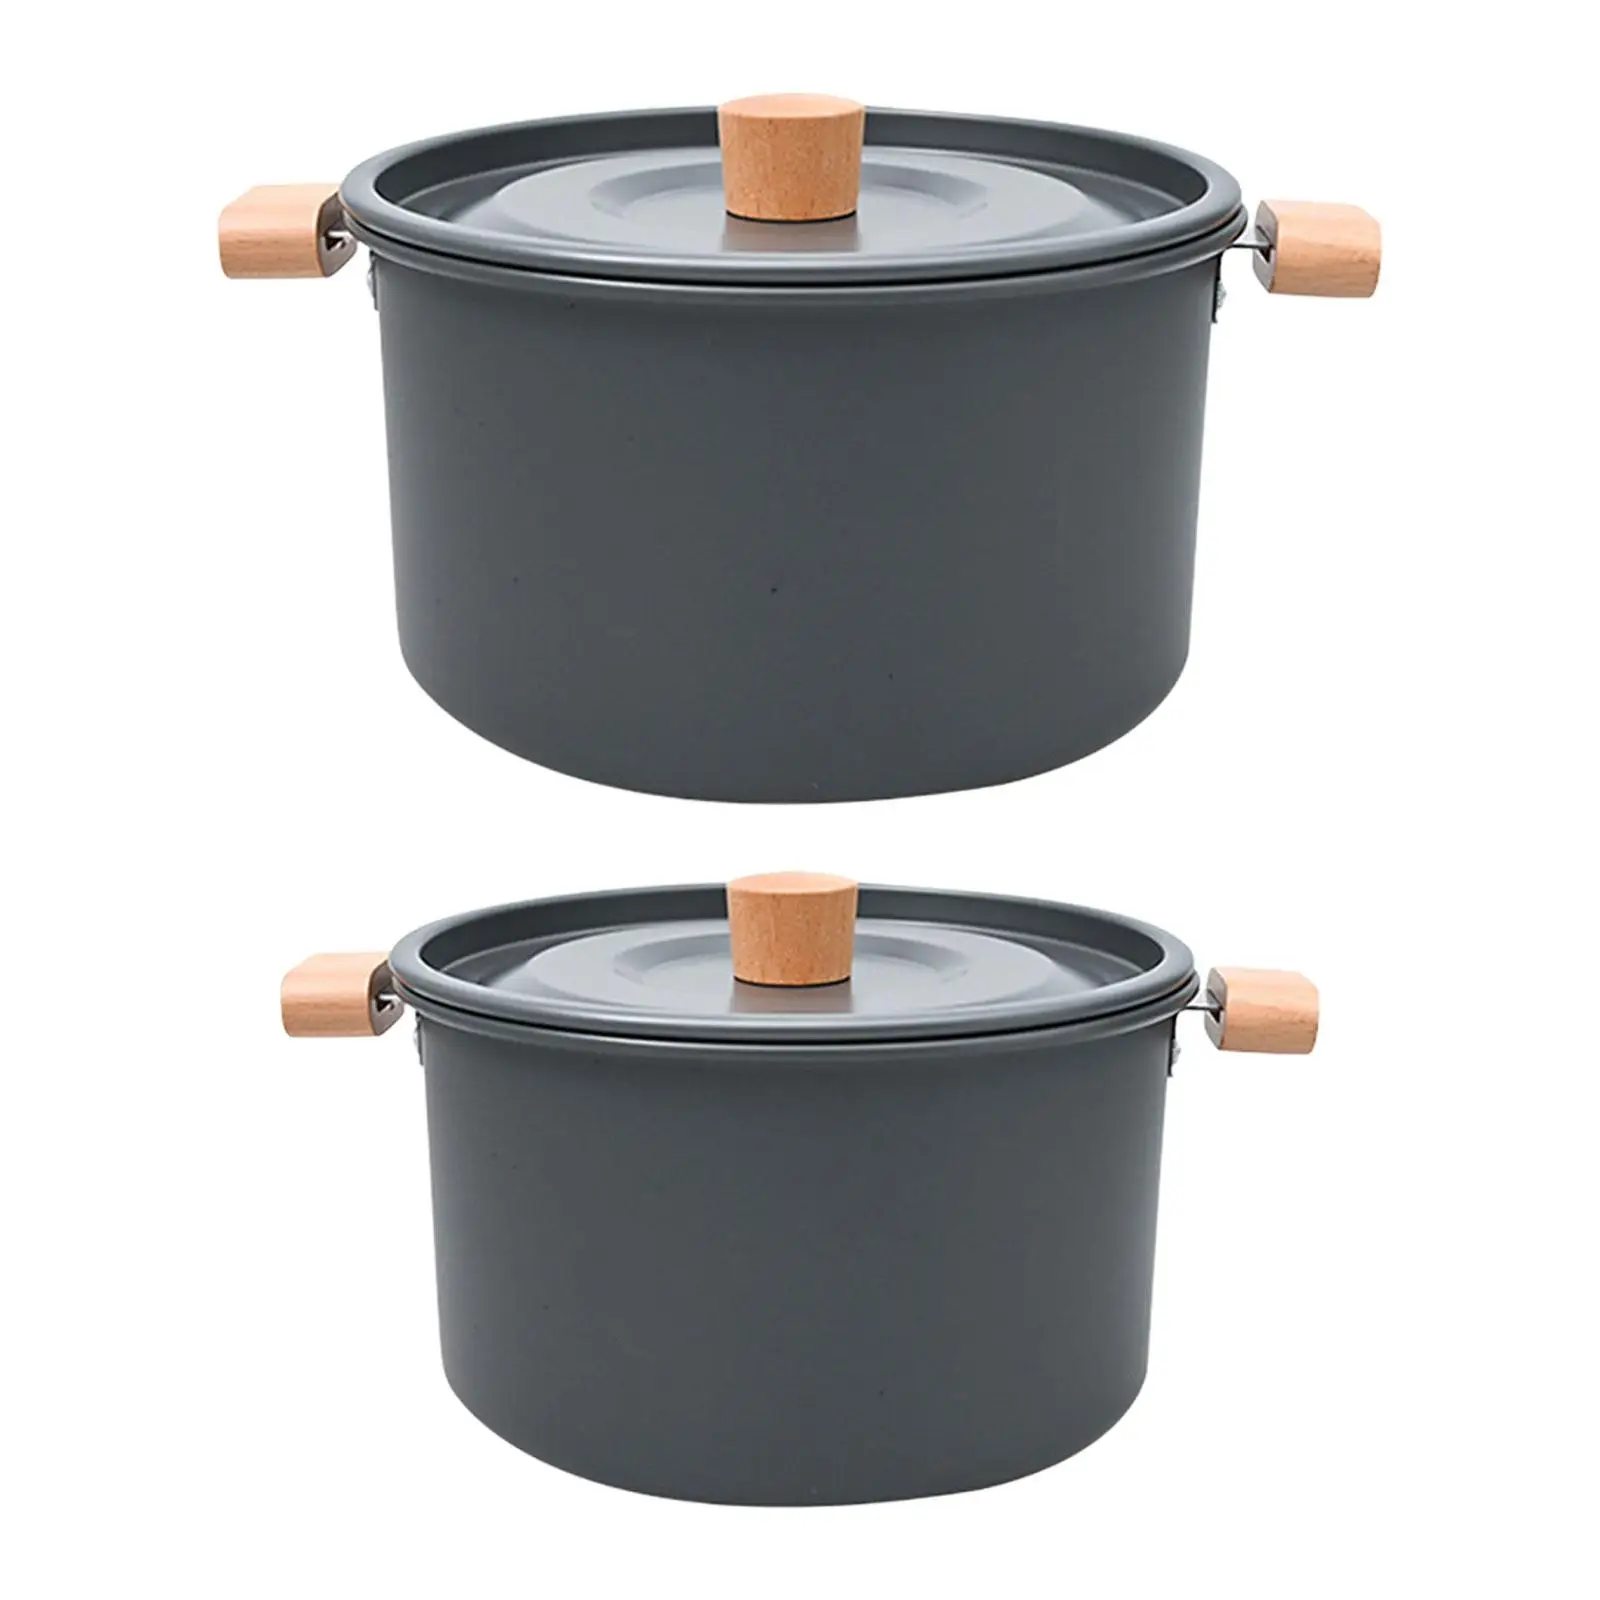 Camping Stockpot Round Large with Lid for Backpacking Home Hiking